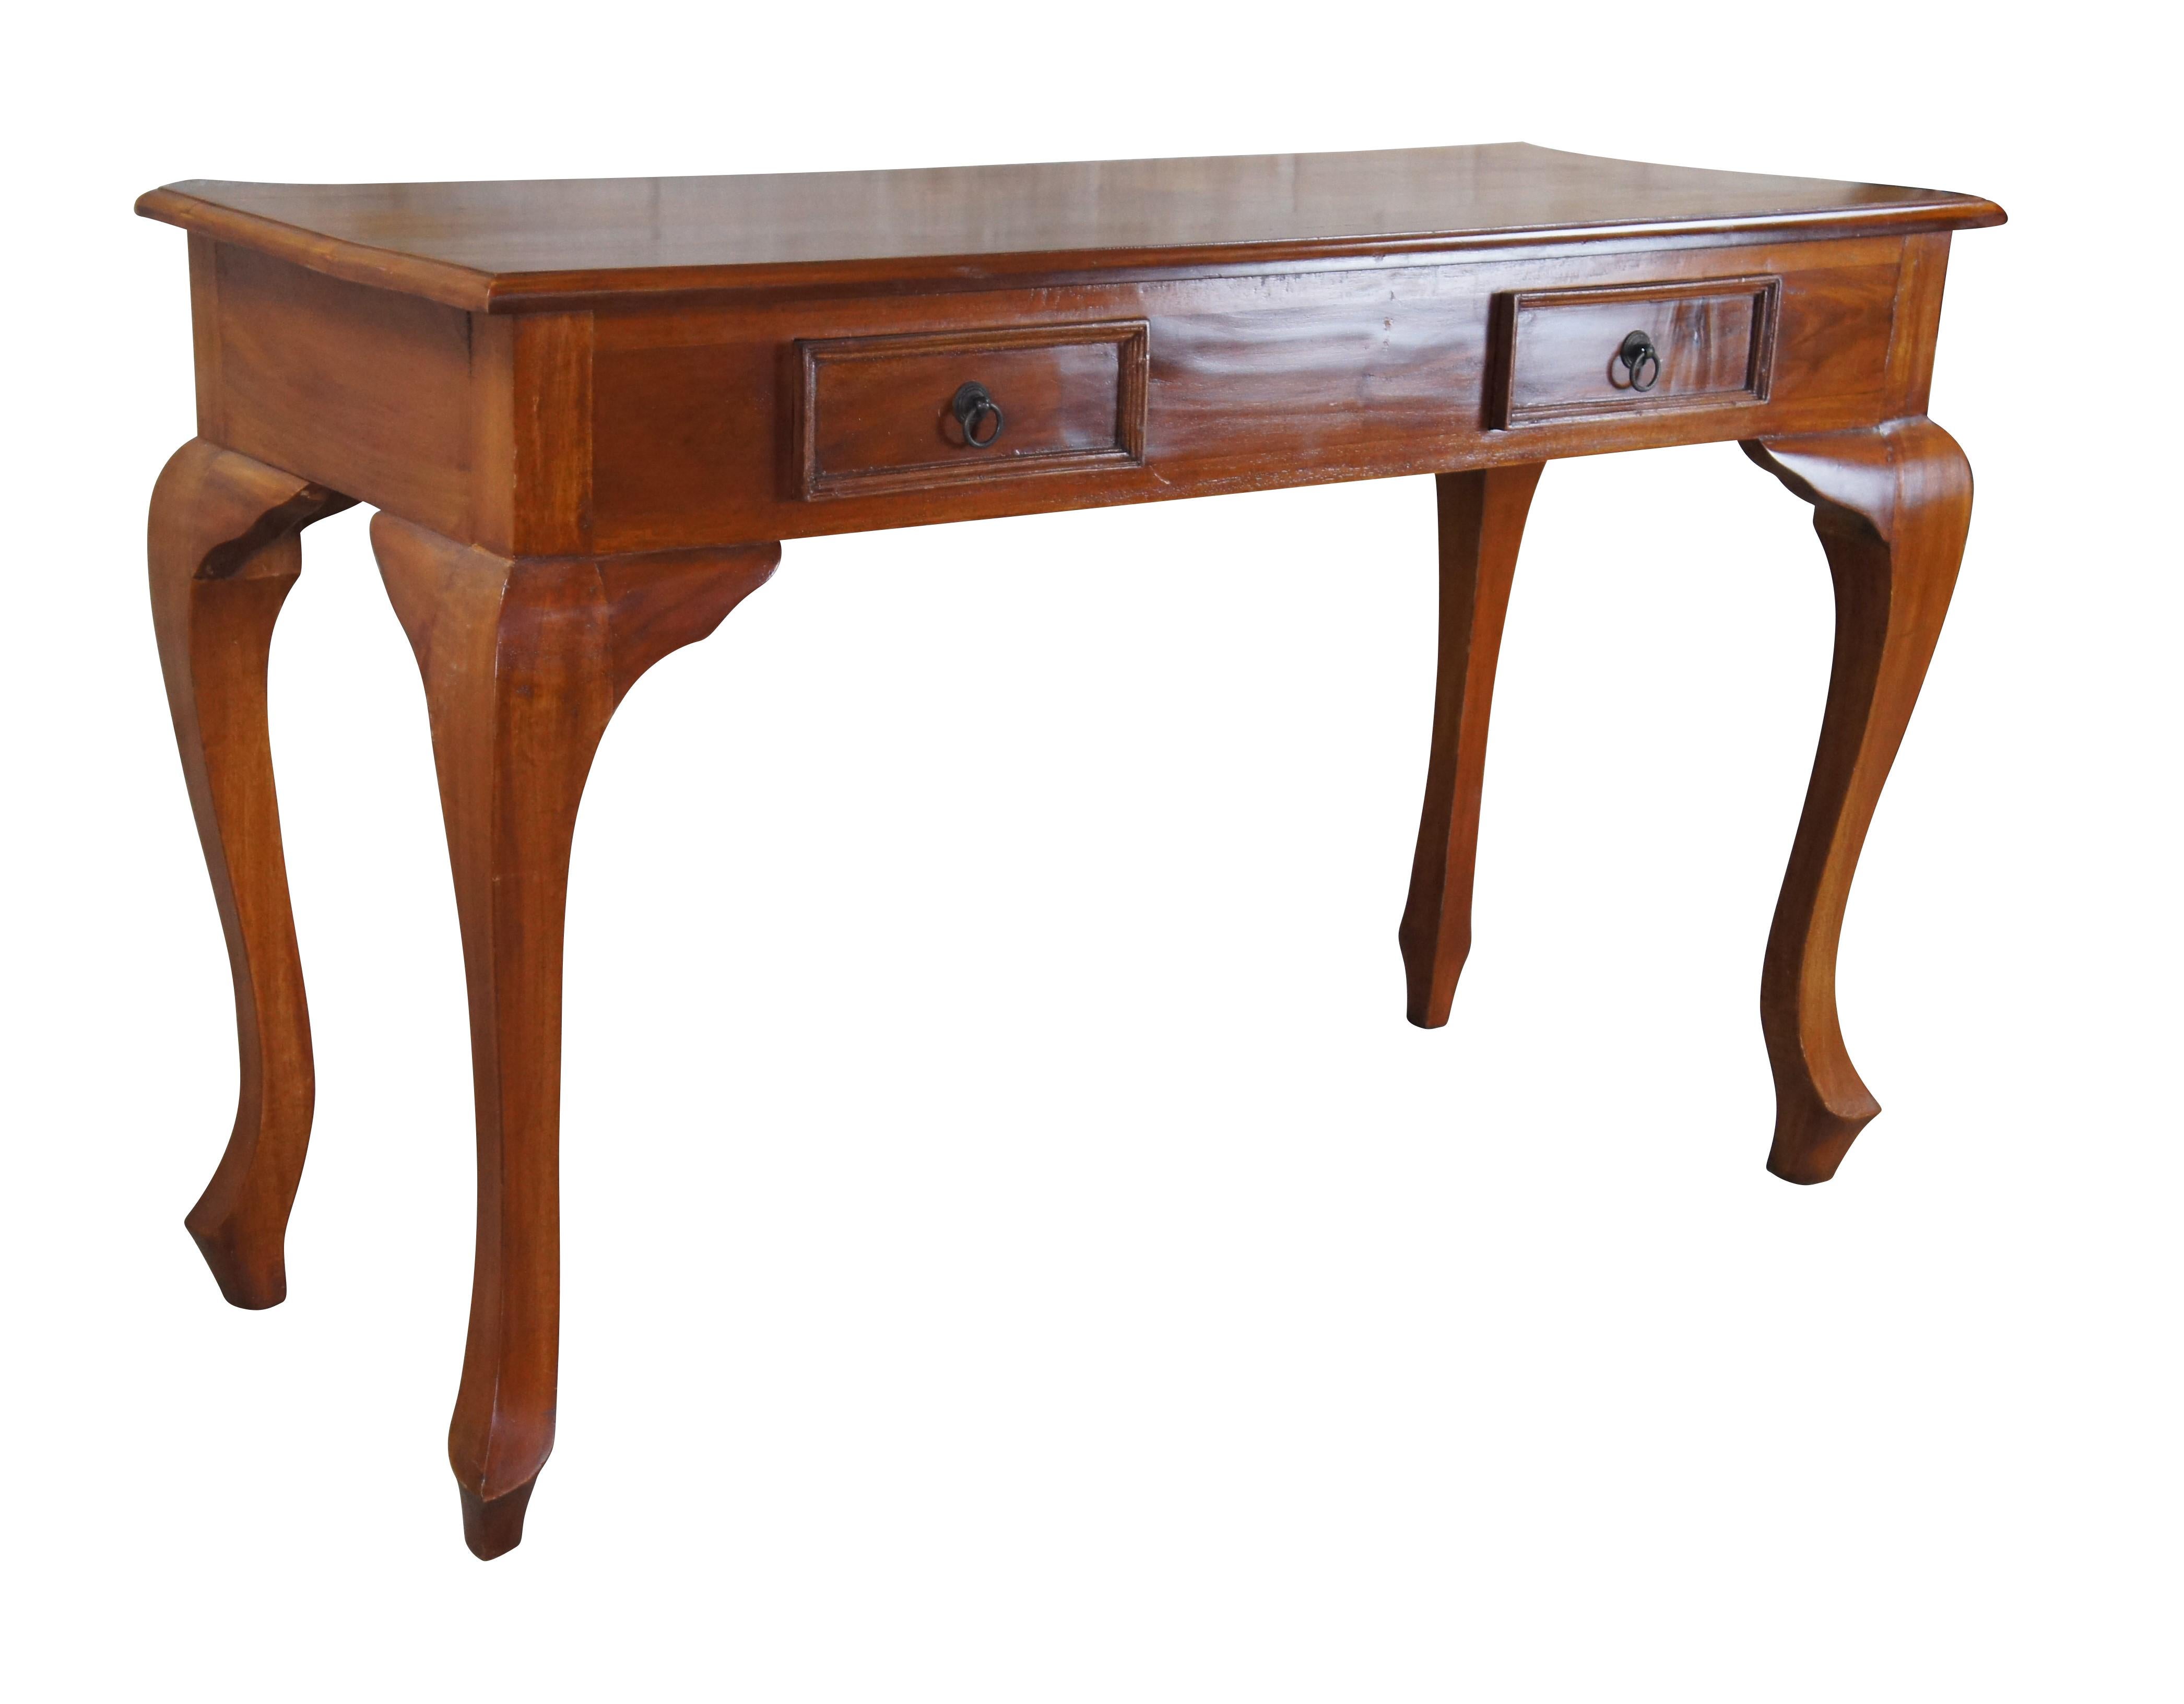 Late 20th century mahogany console, hall or table. Features a rectangular form with two dovetailed drawers and ring pulls within the frieze. Inspired by the Queen Anne period with shapely cabriole legs. Great for use as a console, tv stand or vanity